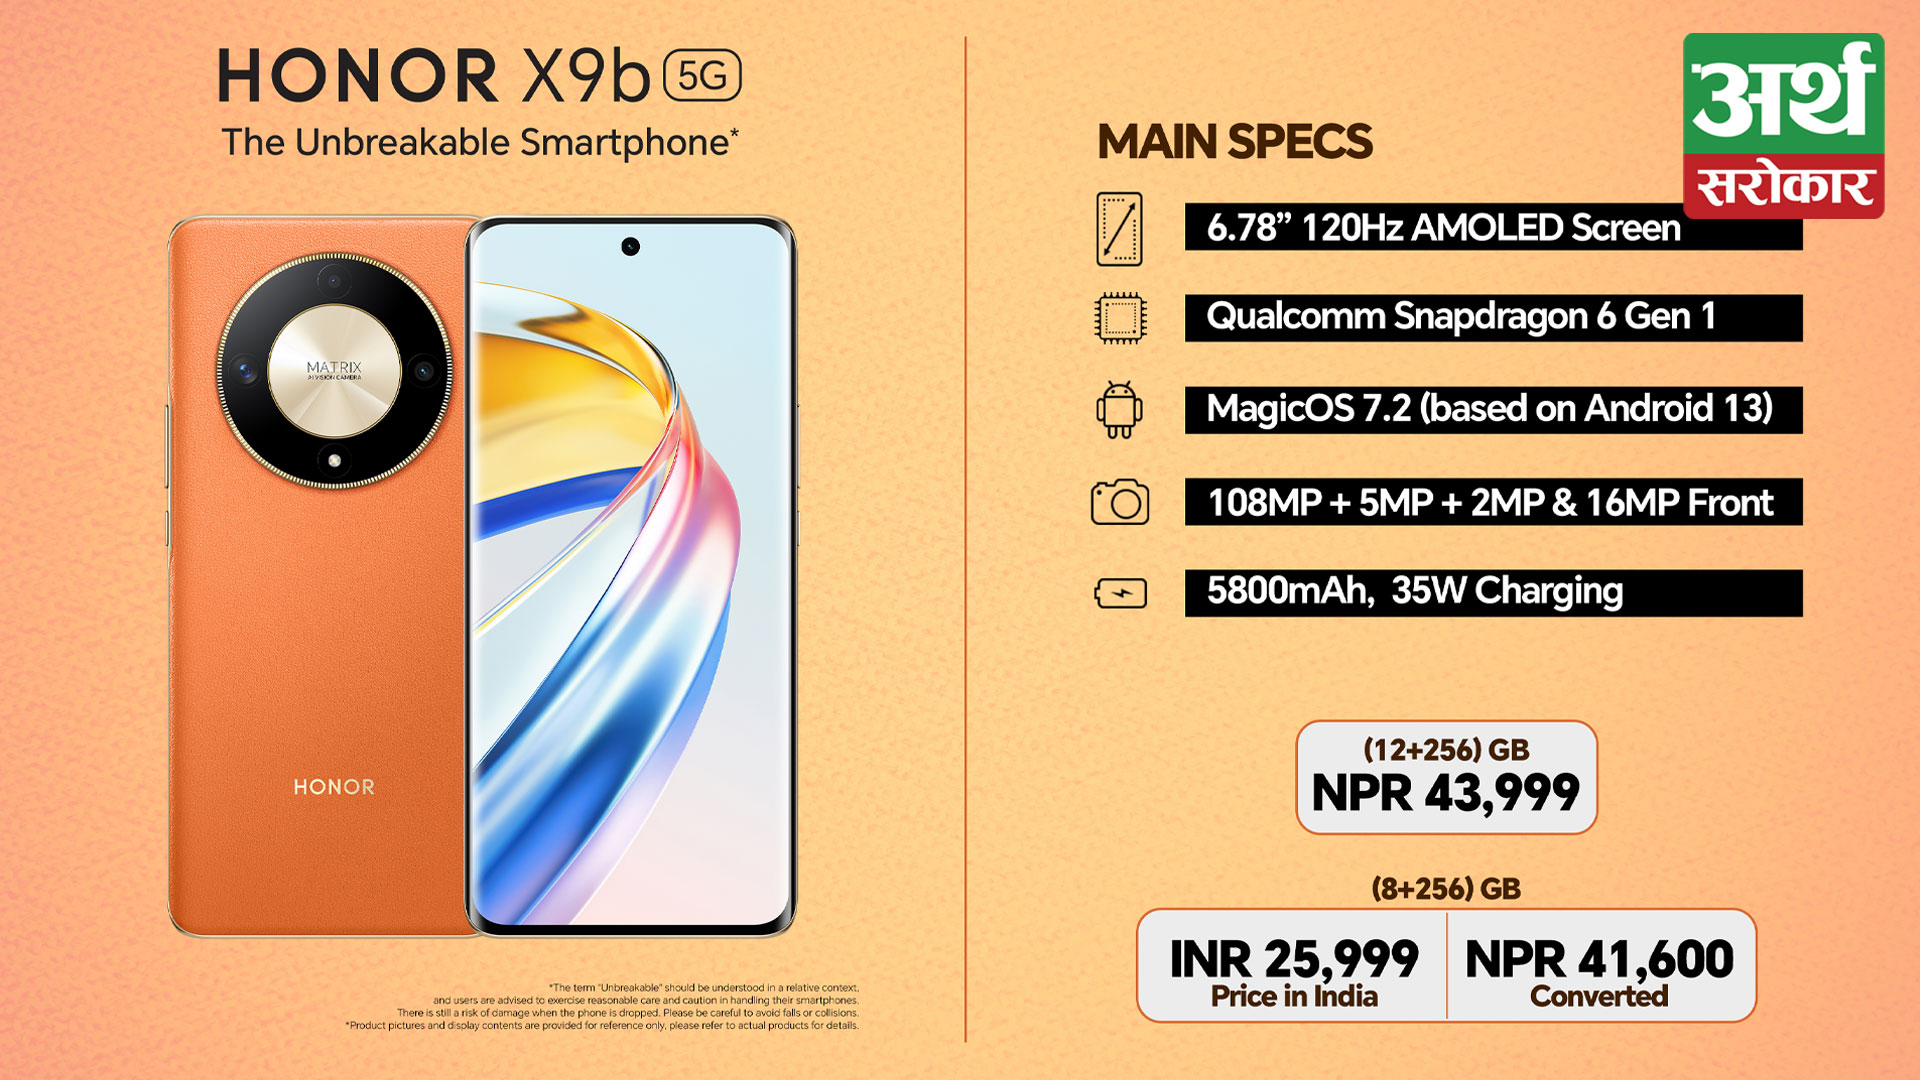 Honor X9b Hits the Indian Market with a Higher Price Than Nepal